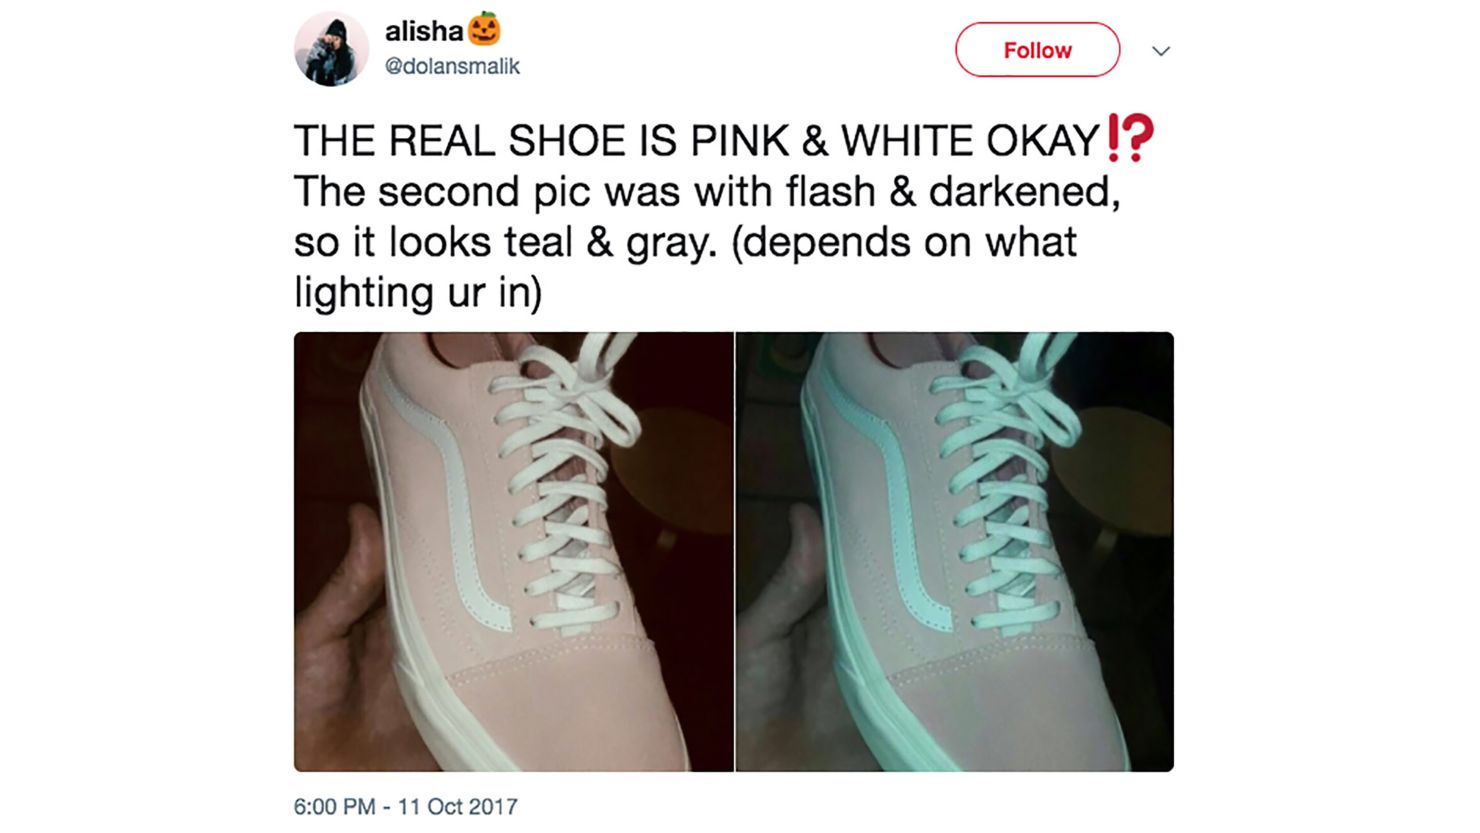 This shoe is the most maddening optical illusion since ‘The dress’ | CNN